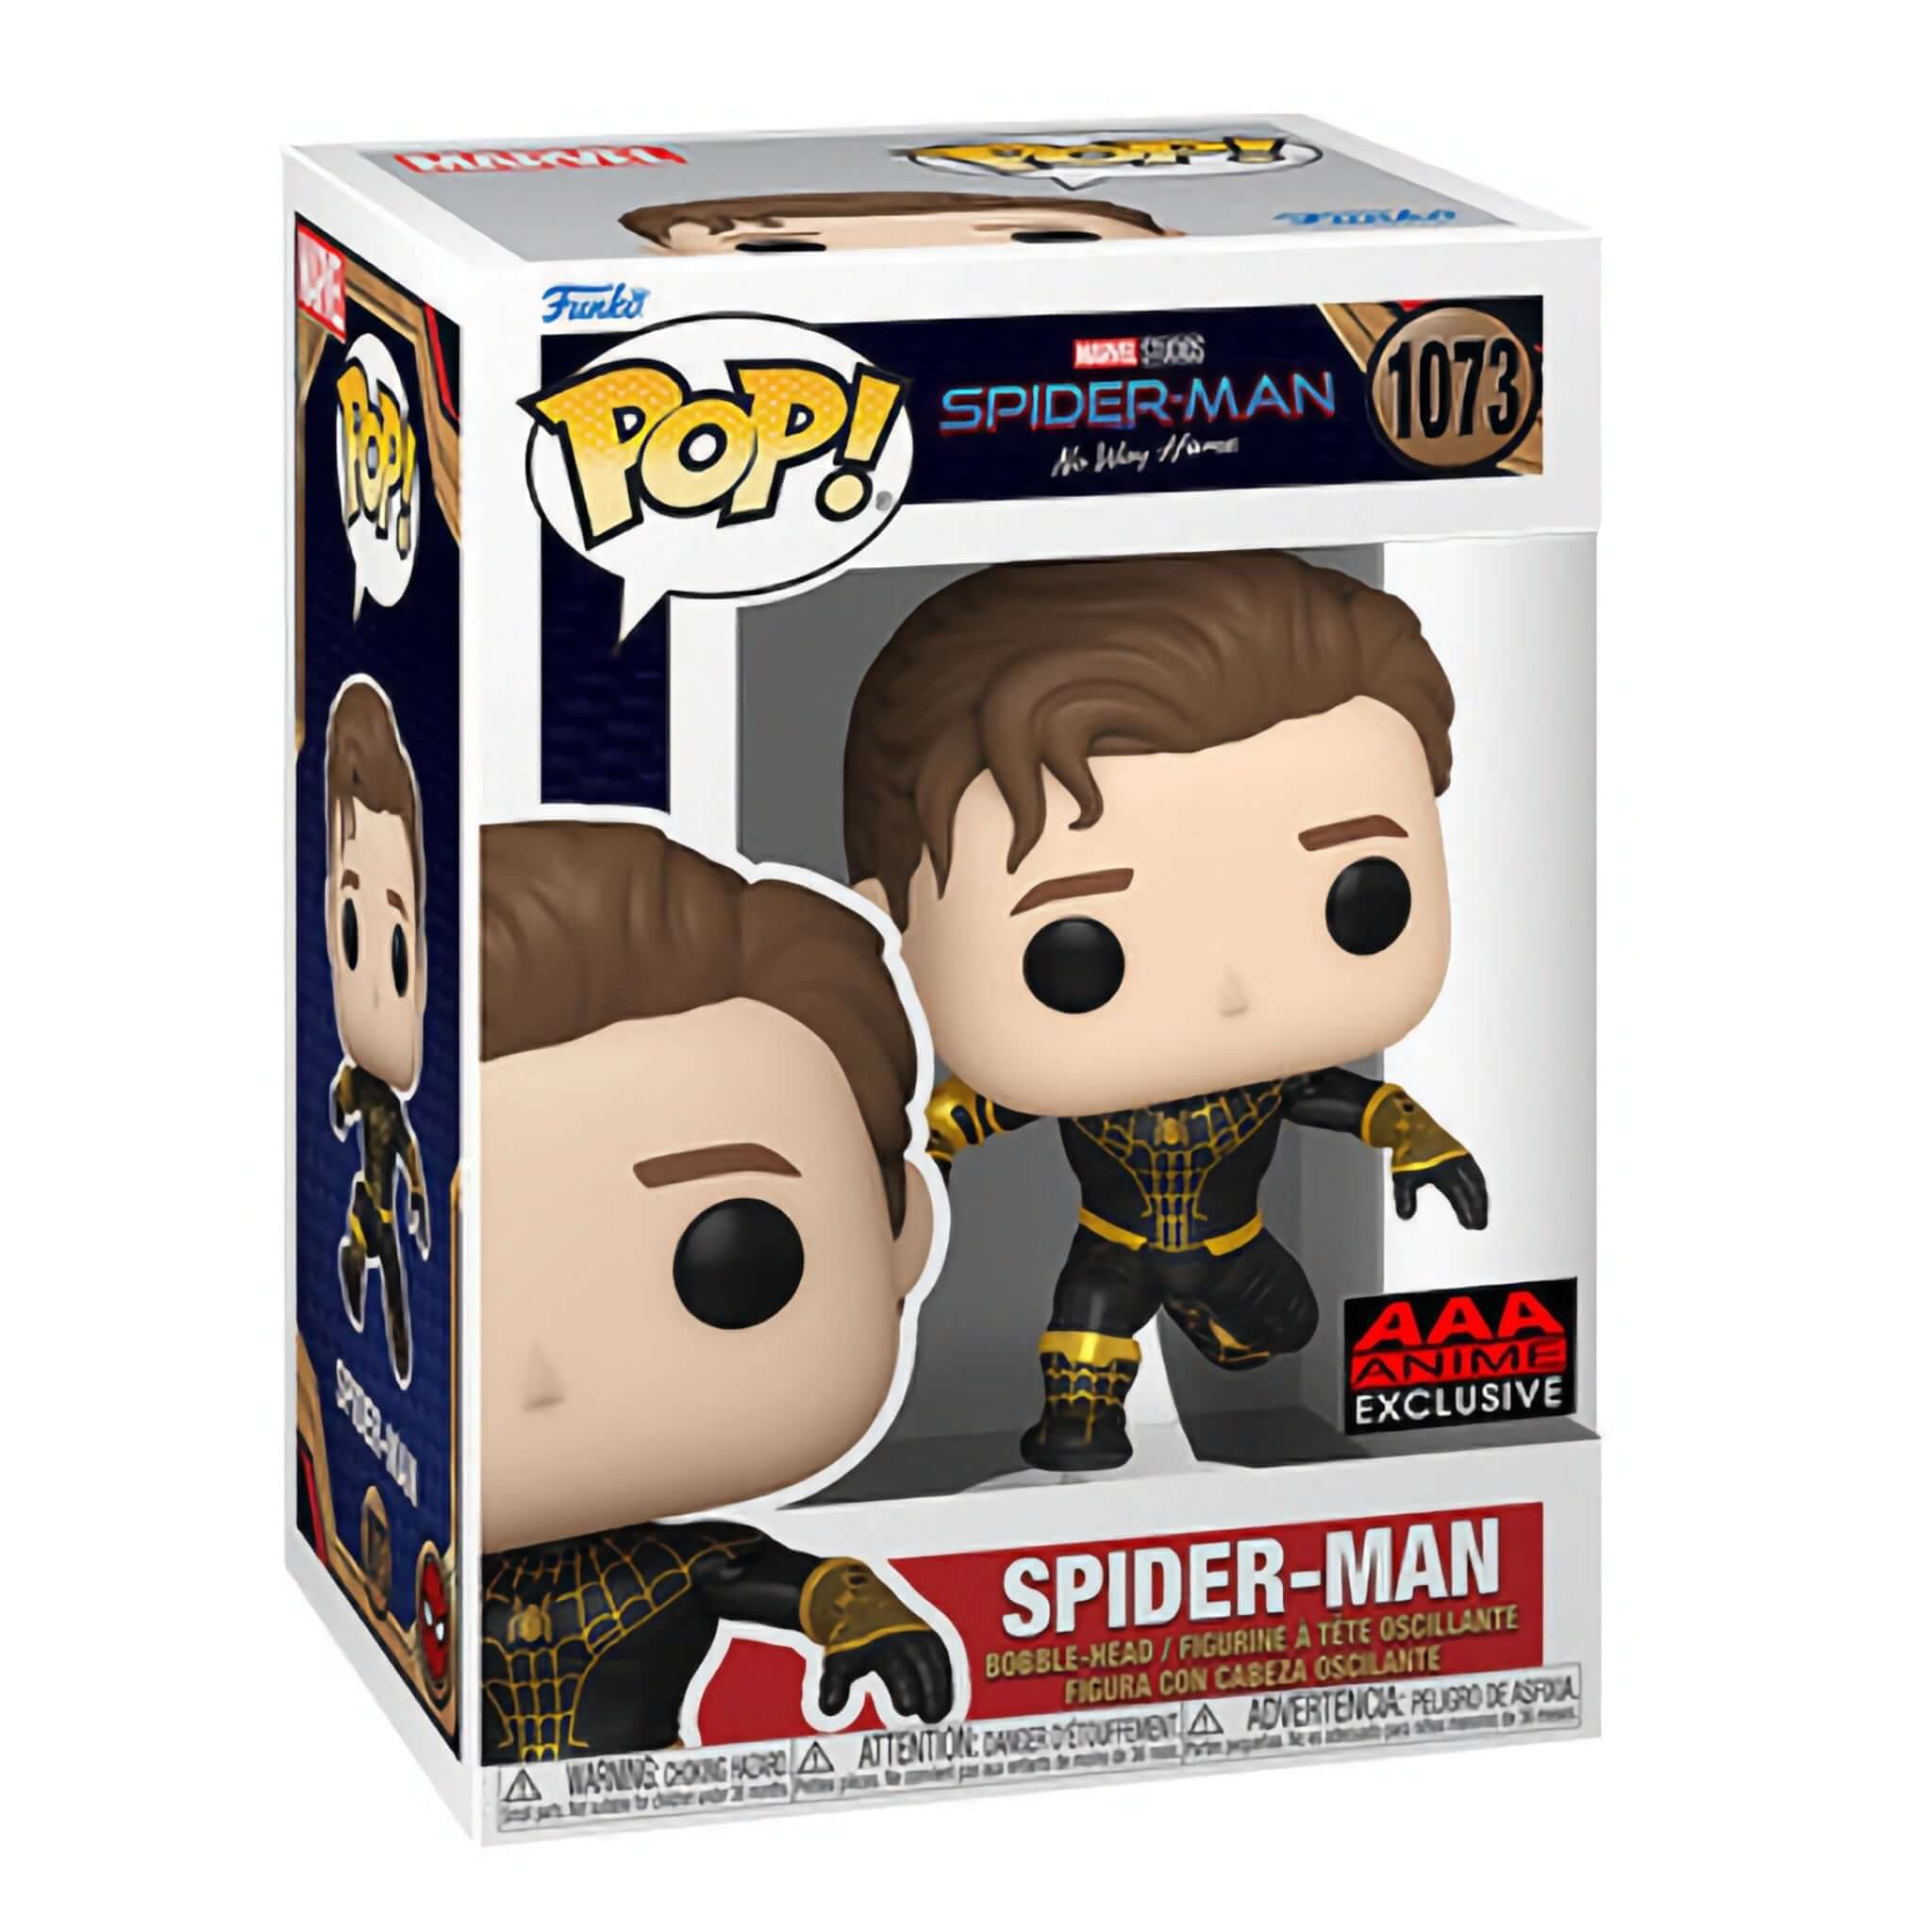 Spider-Man (Leaping | Unmasked) Funko Pop! AAA EXCLUSIVE-Jingle Truck Toys